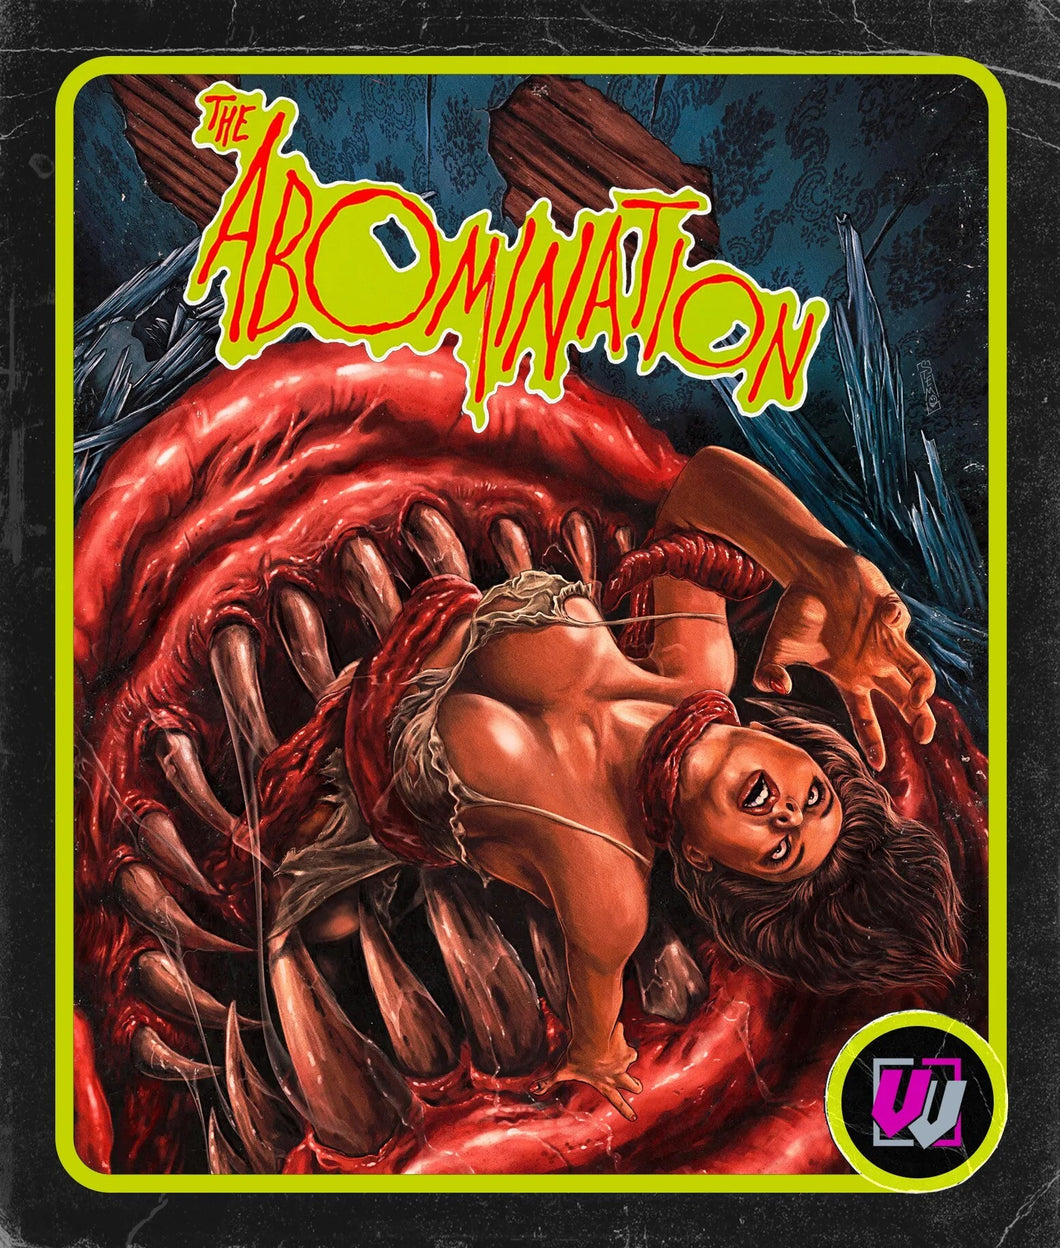 The Abomination (1986) - front cover